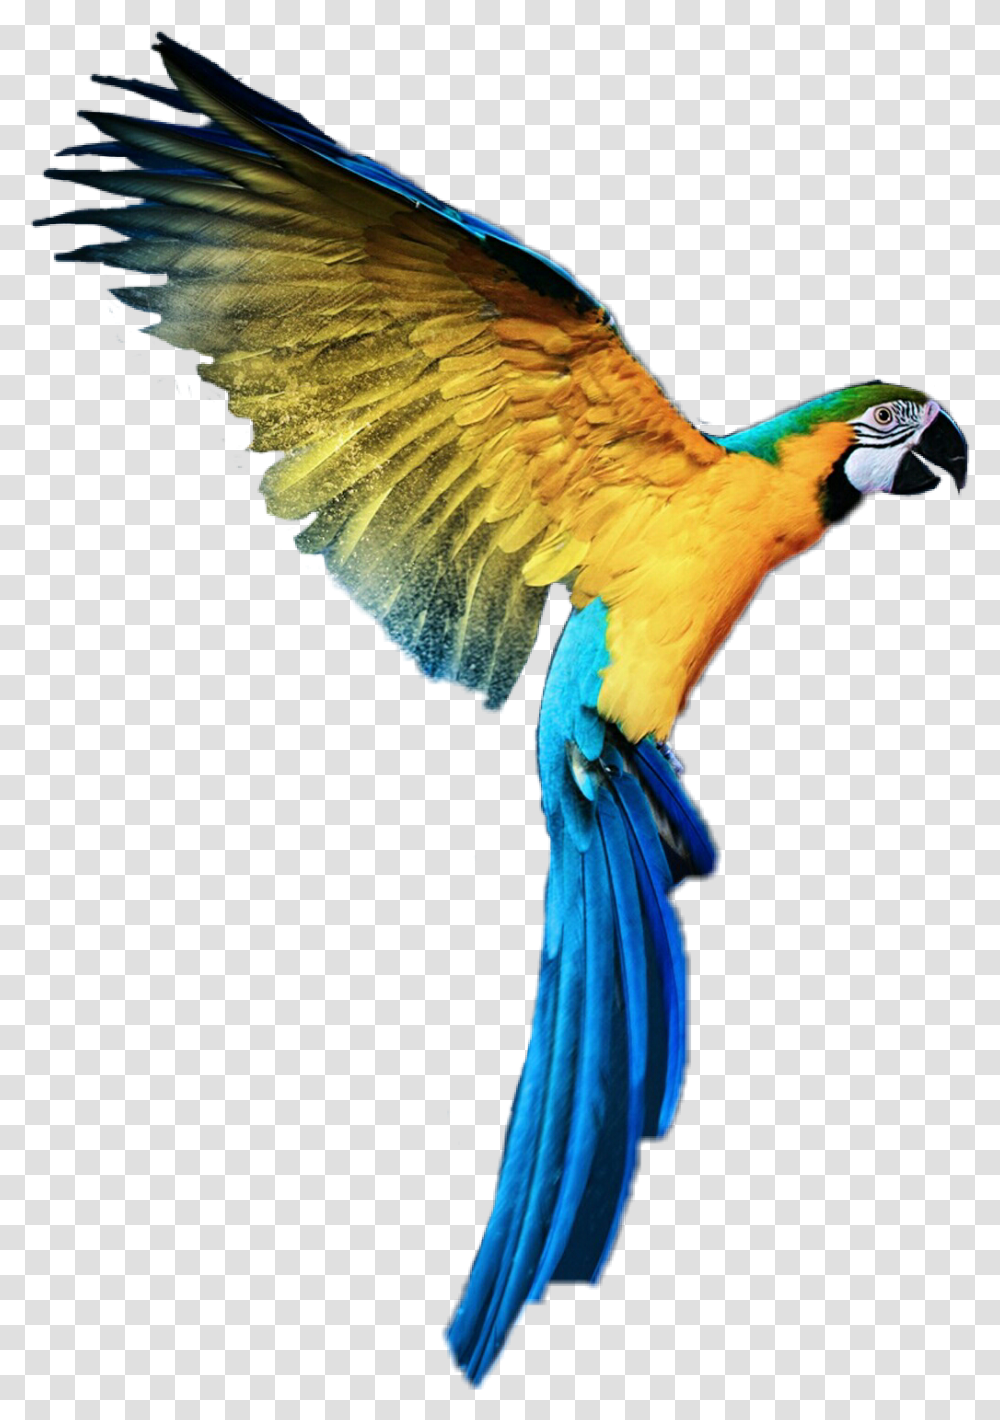 Loros Animales Aves Parrot For Picsart In Hd, Bird, Macaw Transparent Png